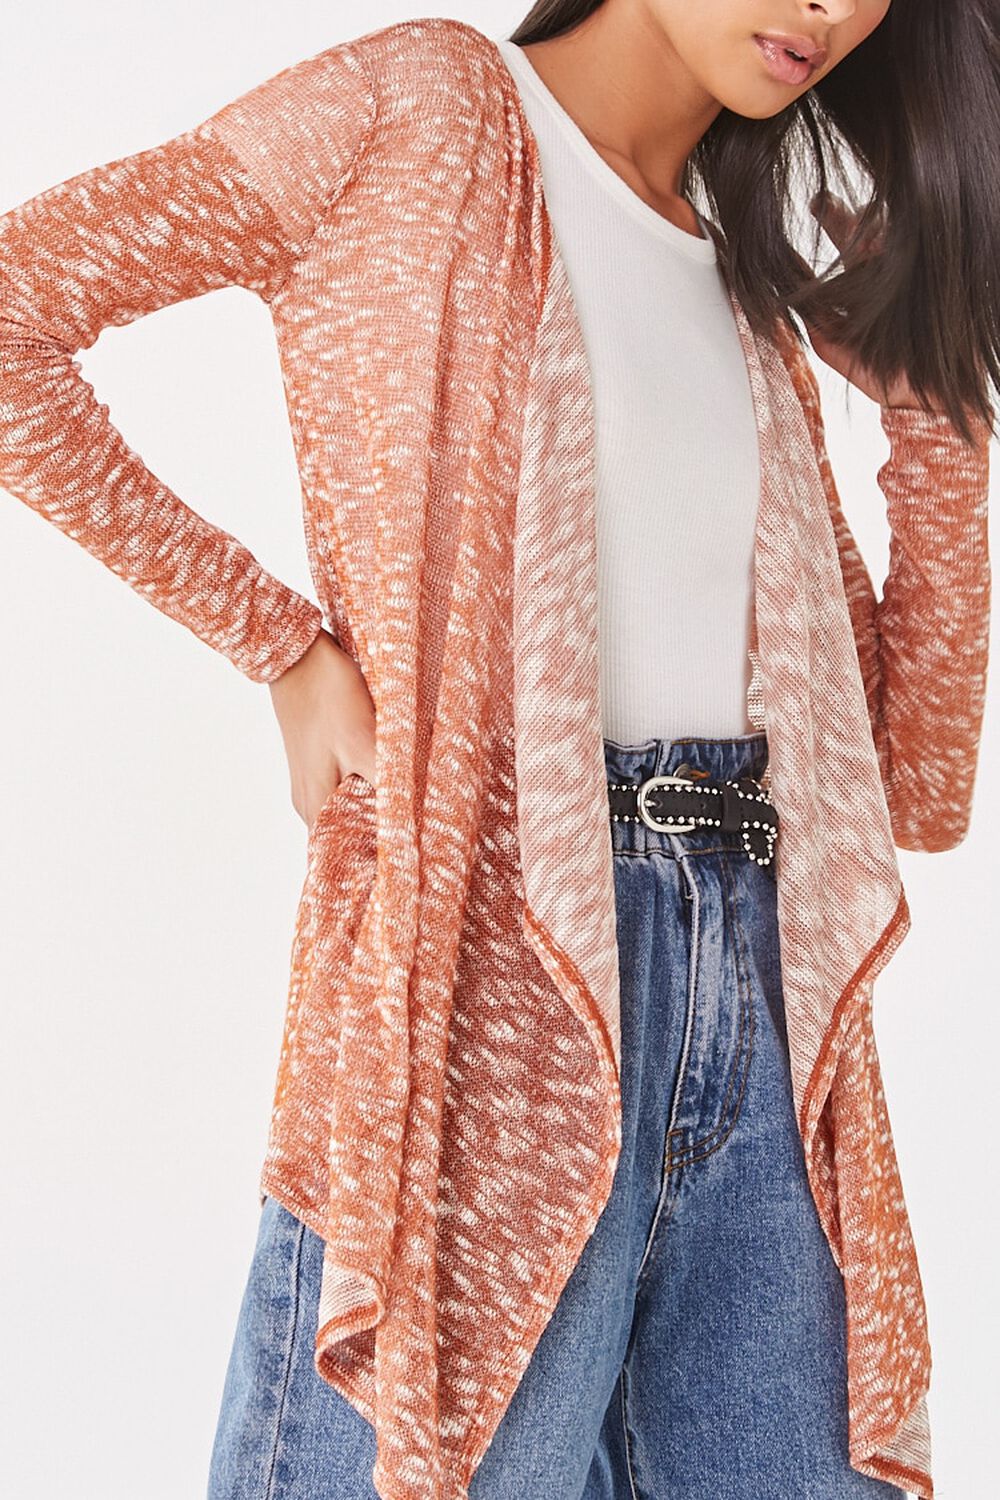 RUST Sheer Marled Open-Front Cardigan, image 1